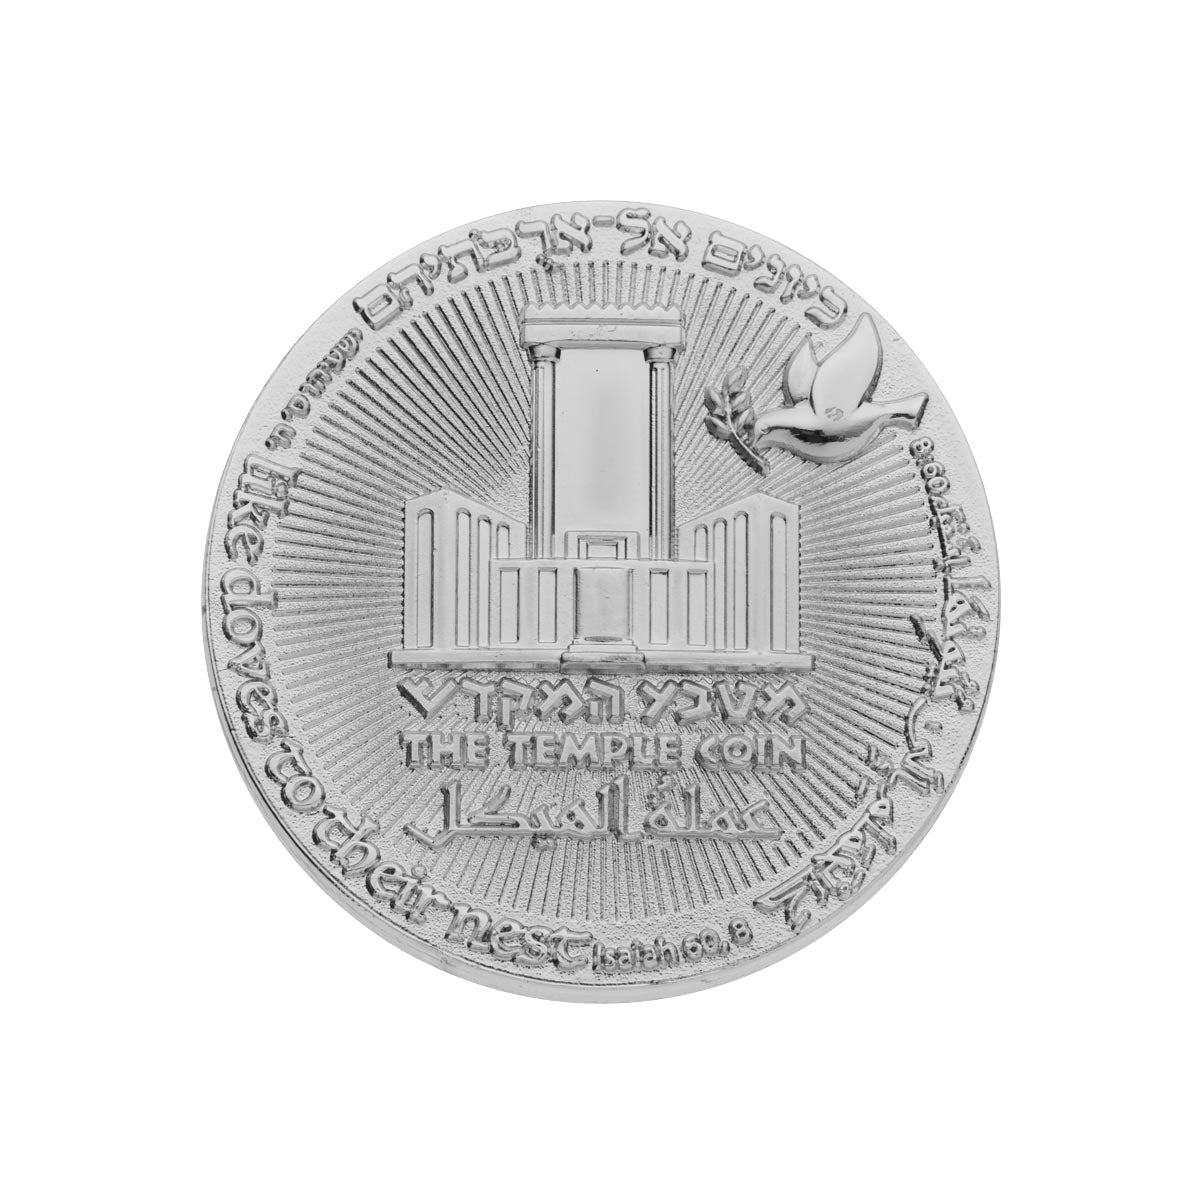 70 Year Israel Redemption Coin (7604272595094)